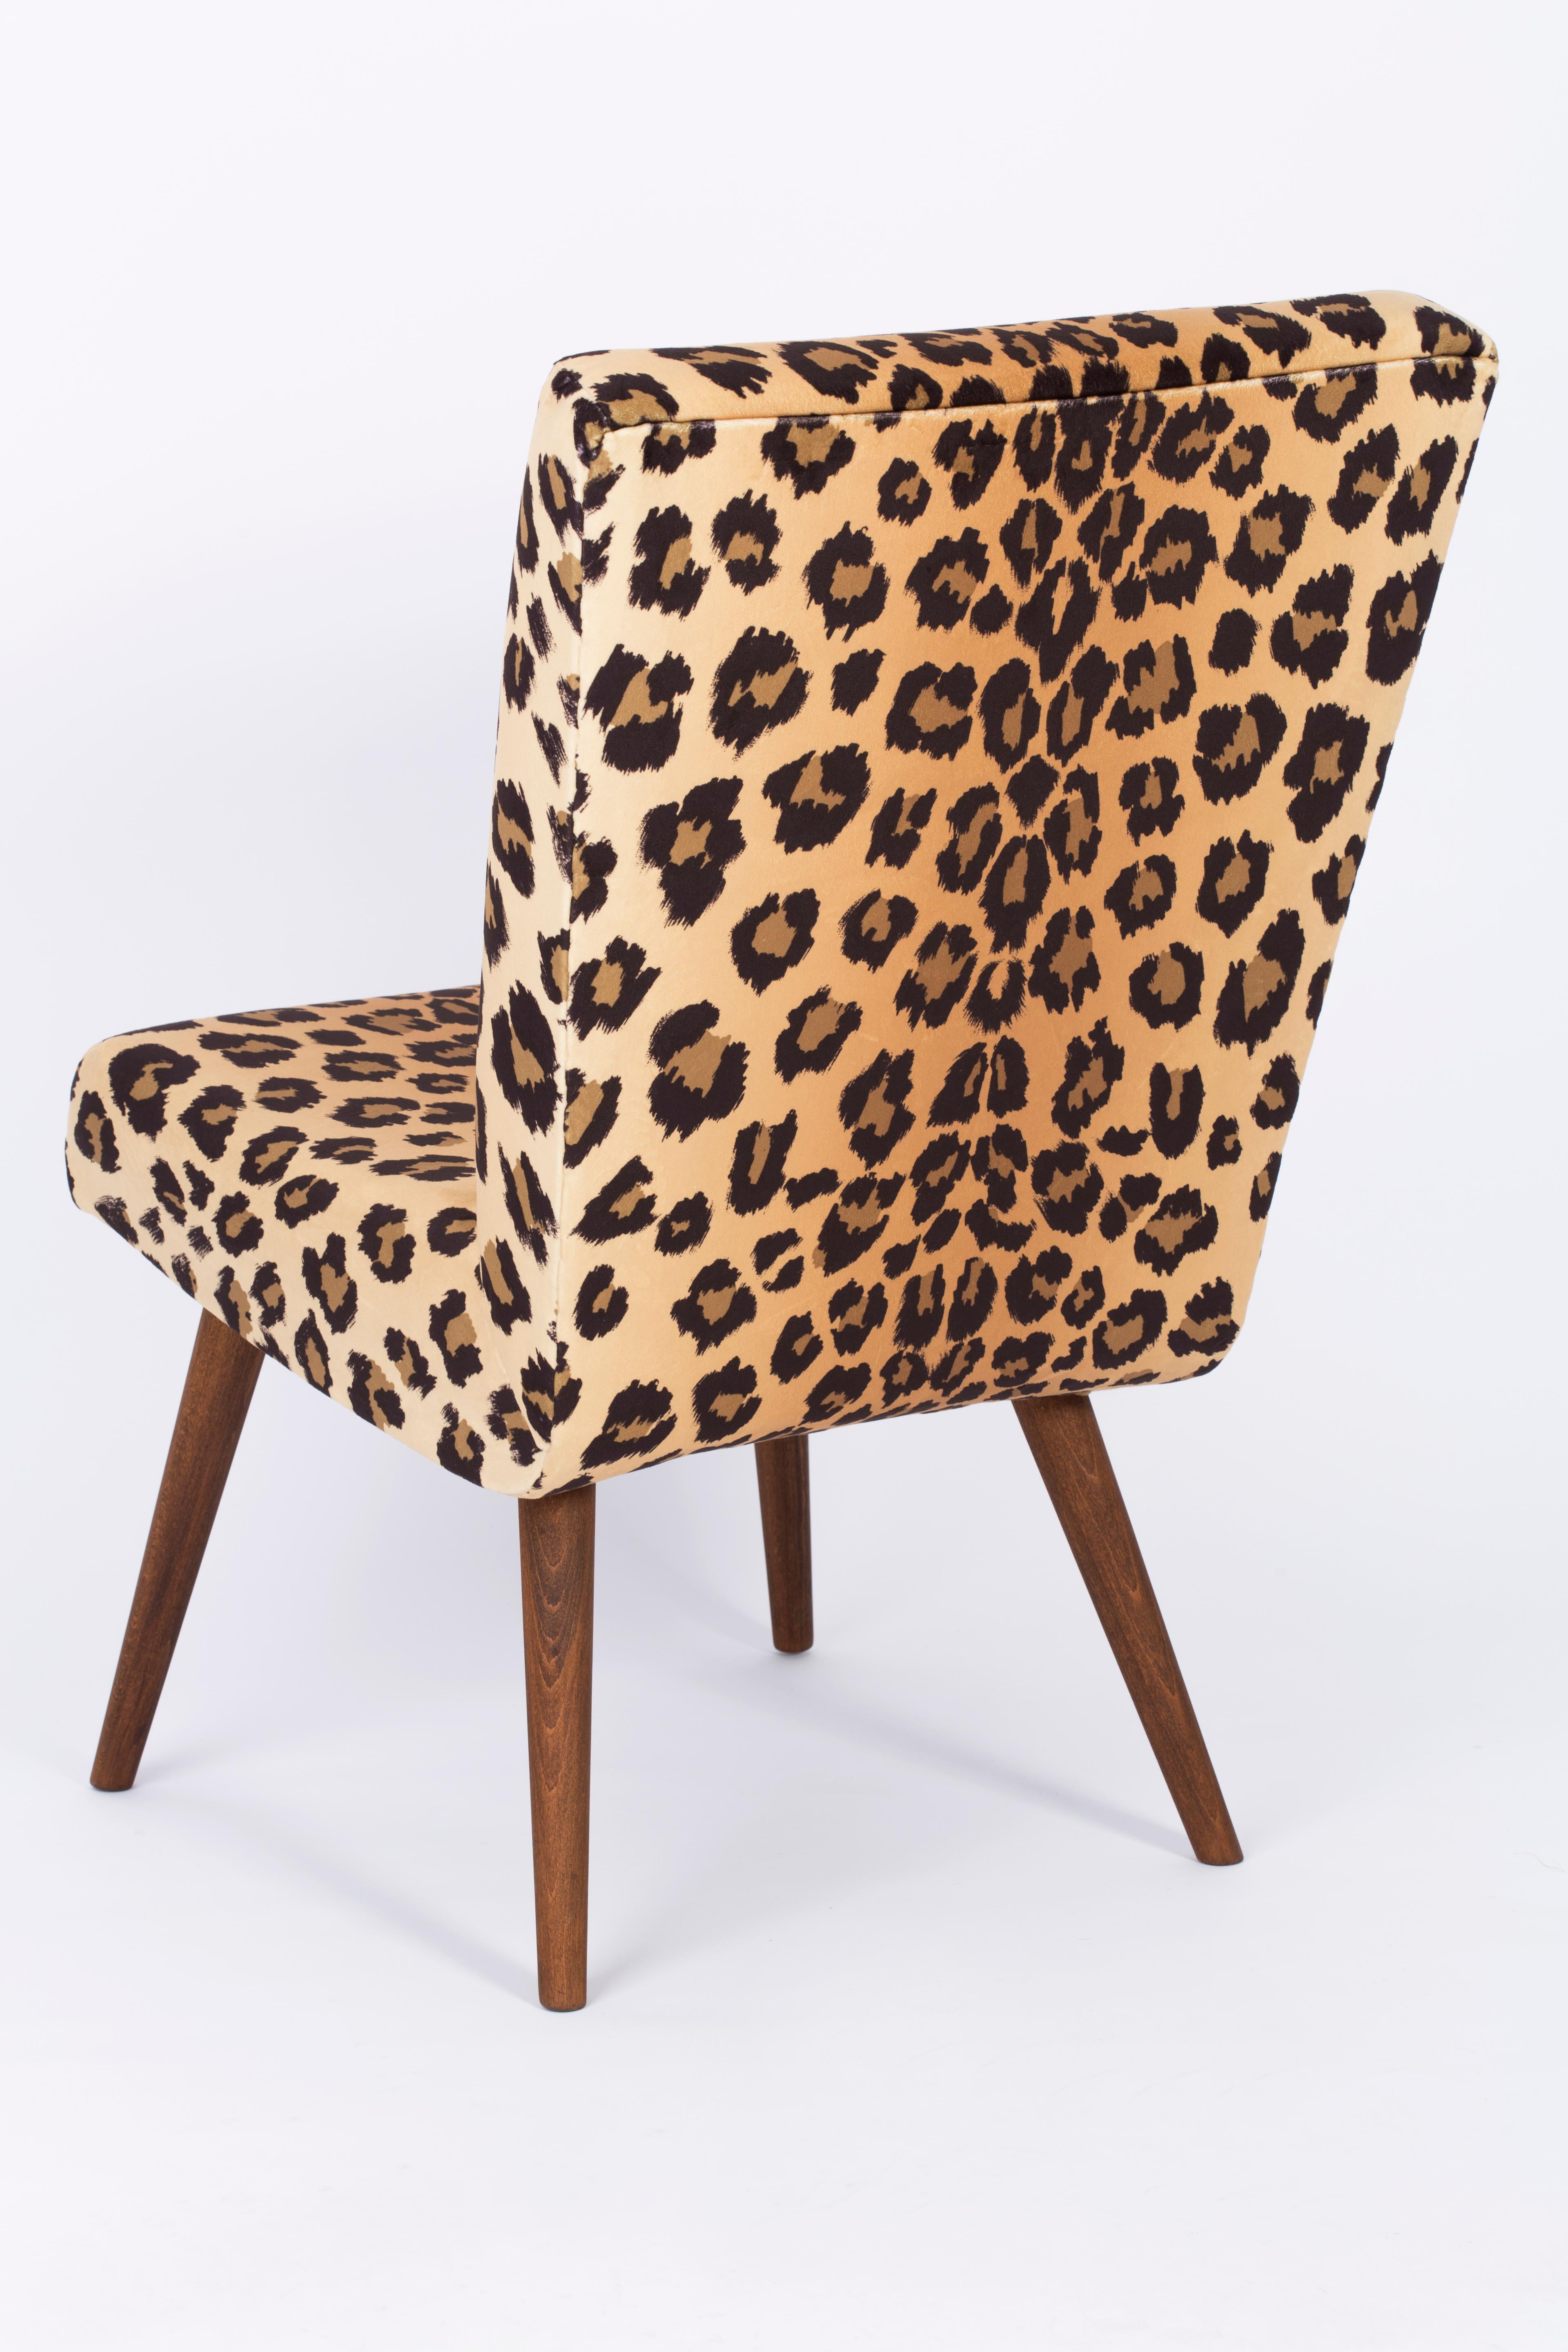 Velvet Set of Two Mid-Century Modern Leopard Print Chairs, 1960s, Germany For Sale